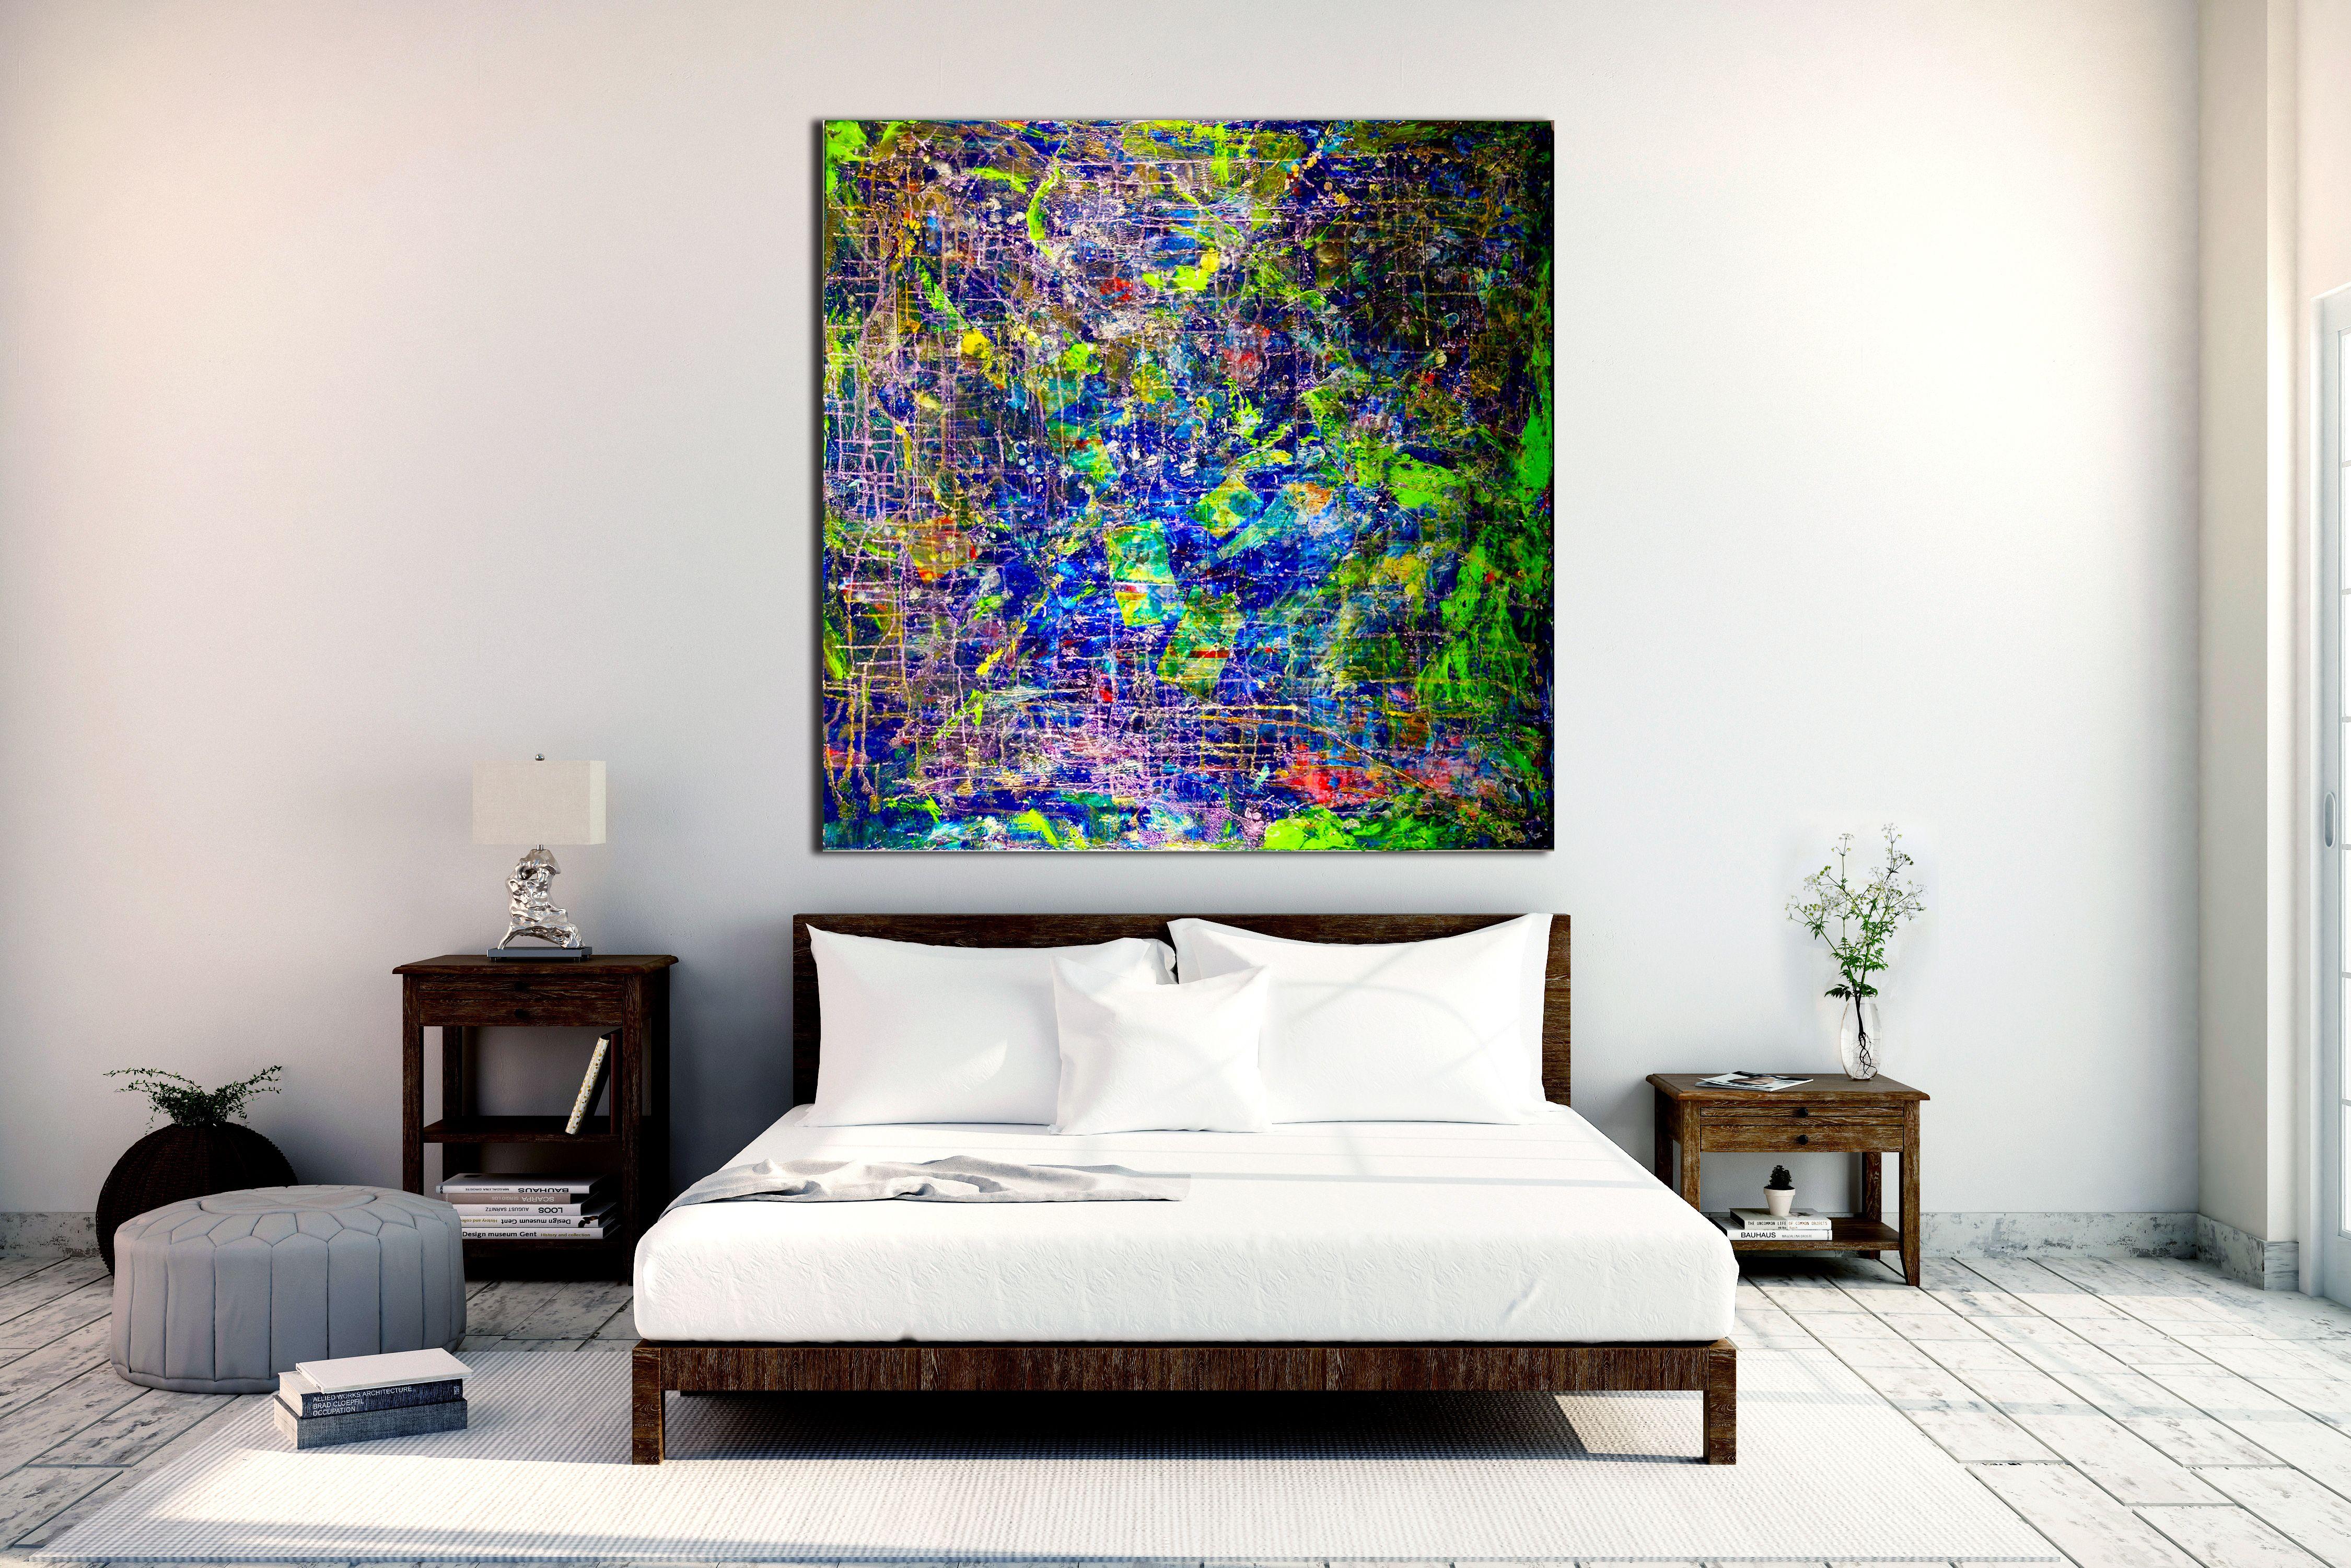 Rain forest Dream III, Painting, Acrylic on Canvas - Black Abstract Painting by Nestor Toro